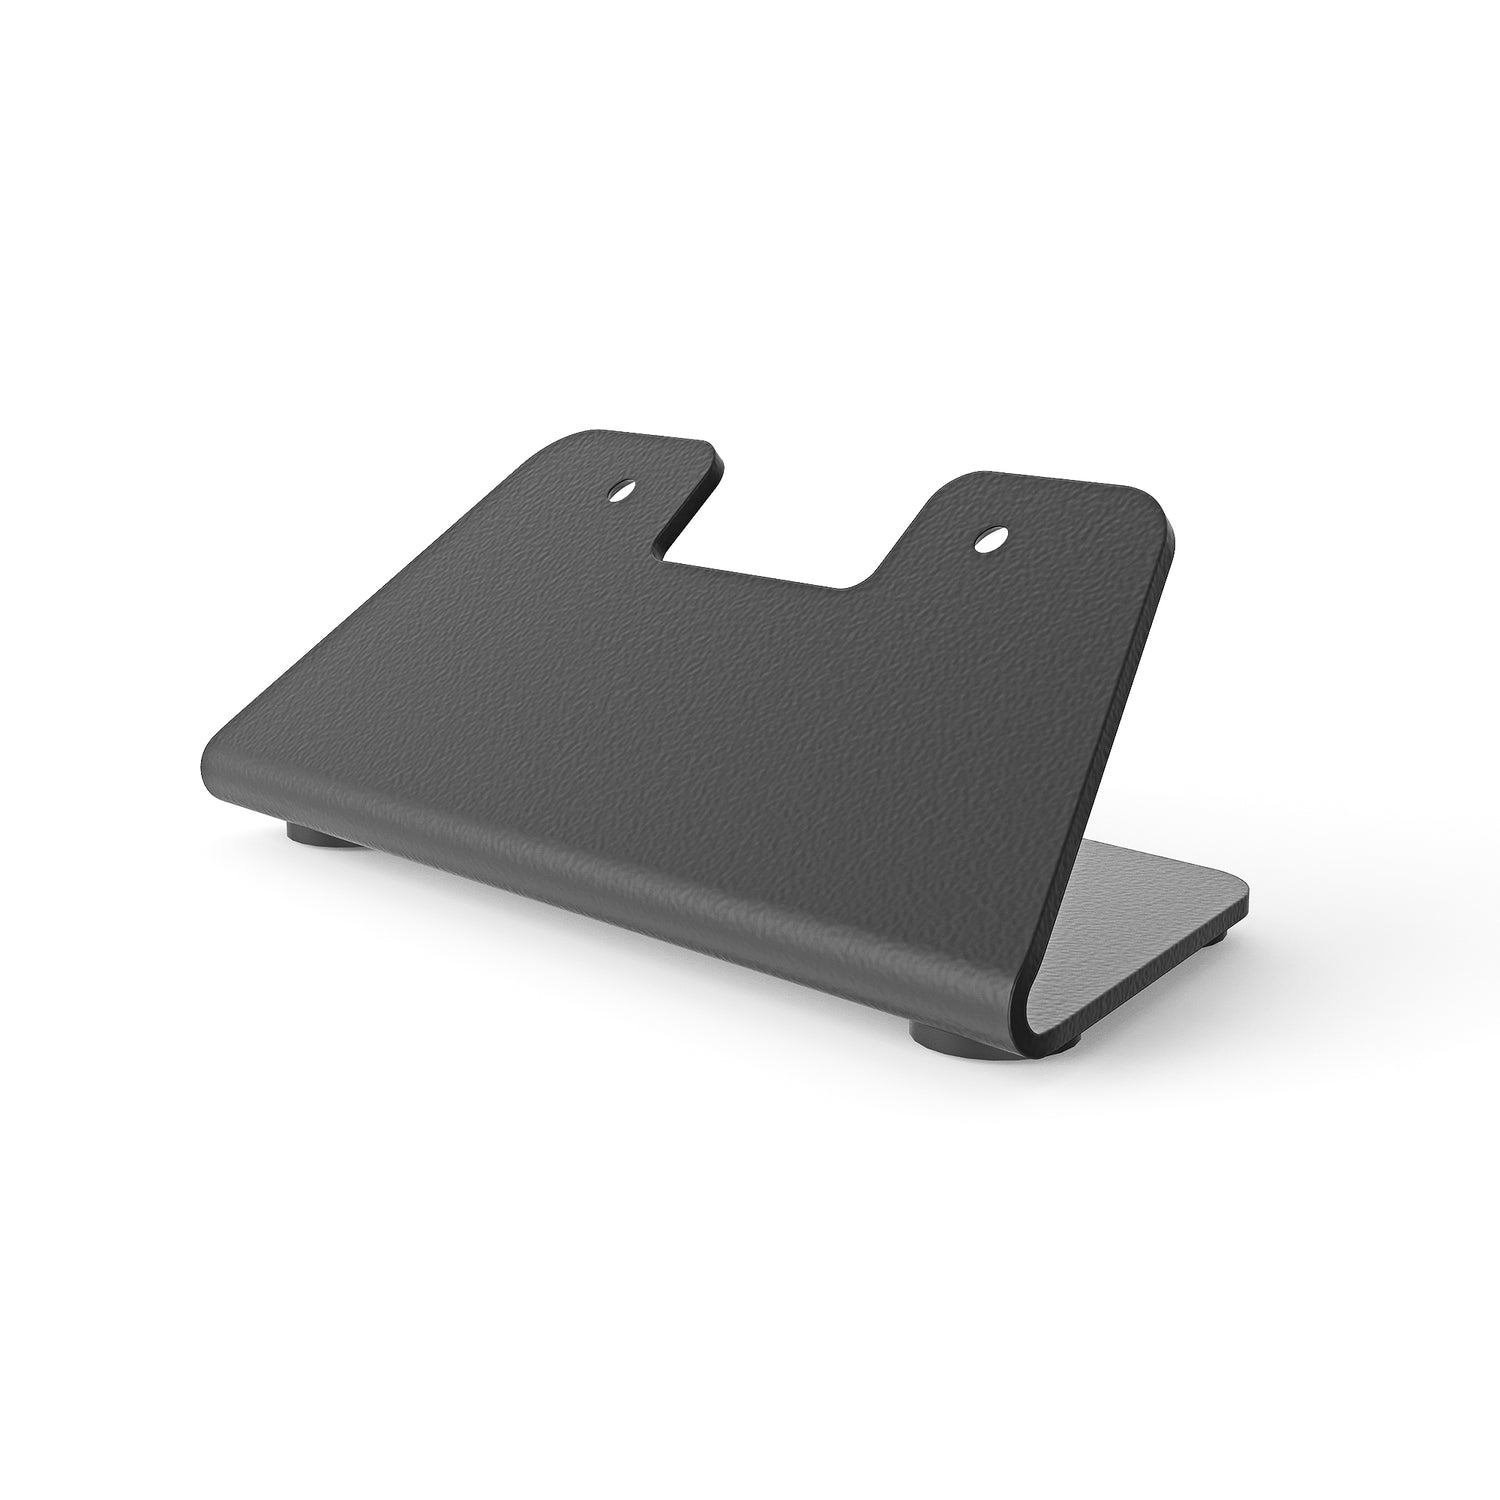 Heckler Design Stand For Neat Pad Tablet/UMPC Black (Stand For Neat Pad - Tablet/UMPC Black - Warranty: 24M)